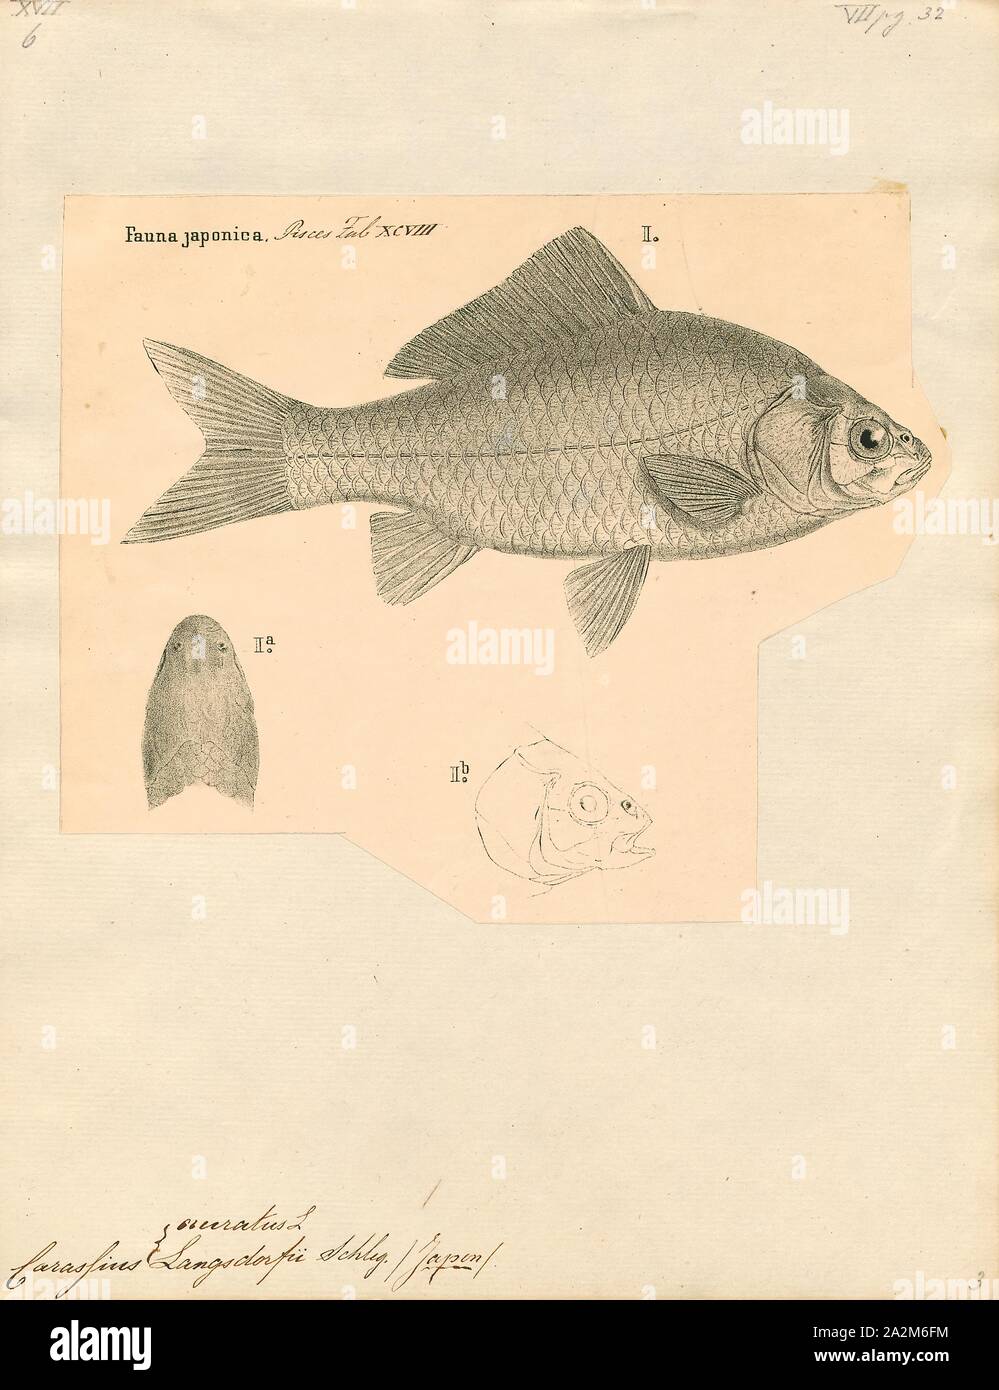 Carassius auratus, Print, The goldfish (Carassius auratus) is a freshwater fish in the family Cyprinidae of order Cypriniformes. It is one of the most commonly kept aquarium fish., 1833-1850 Stock Photo